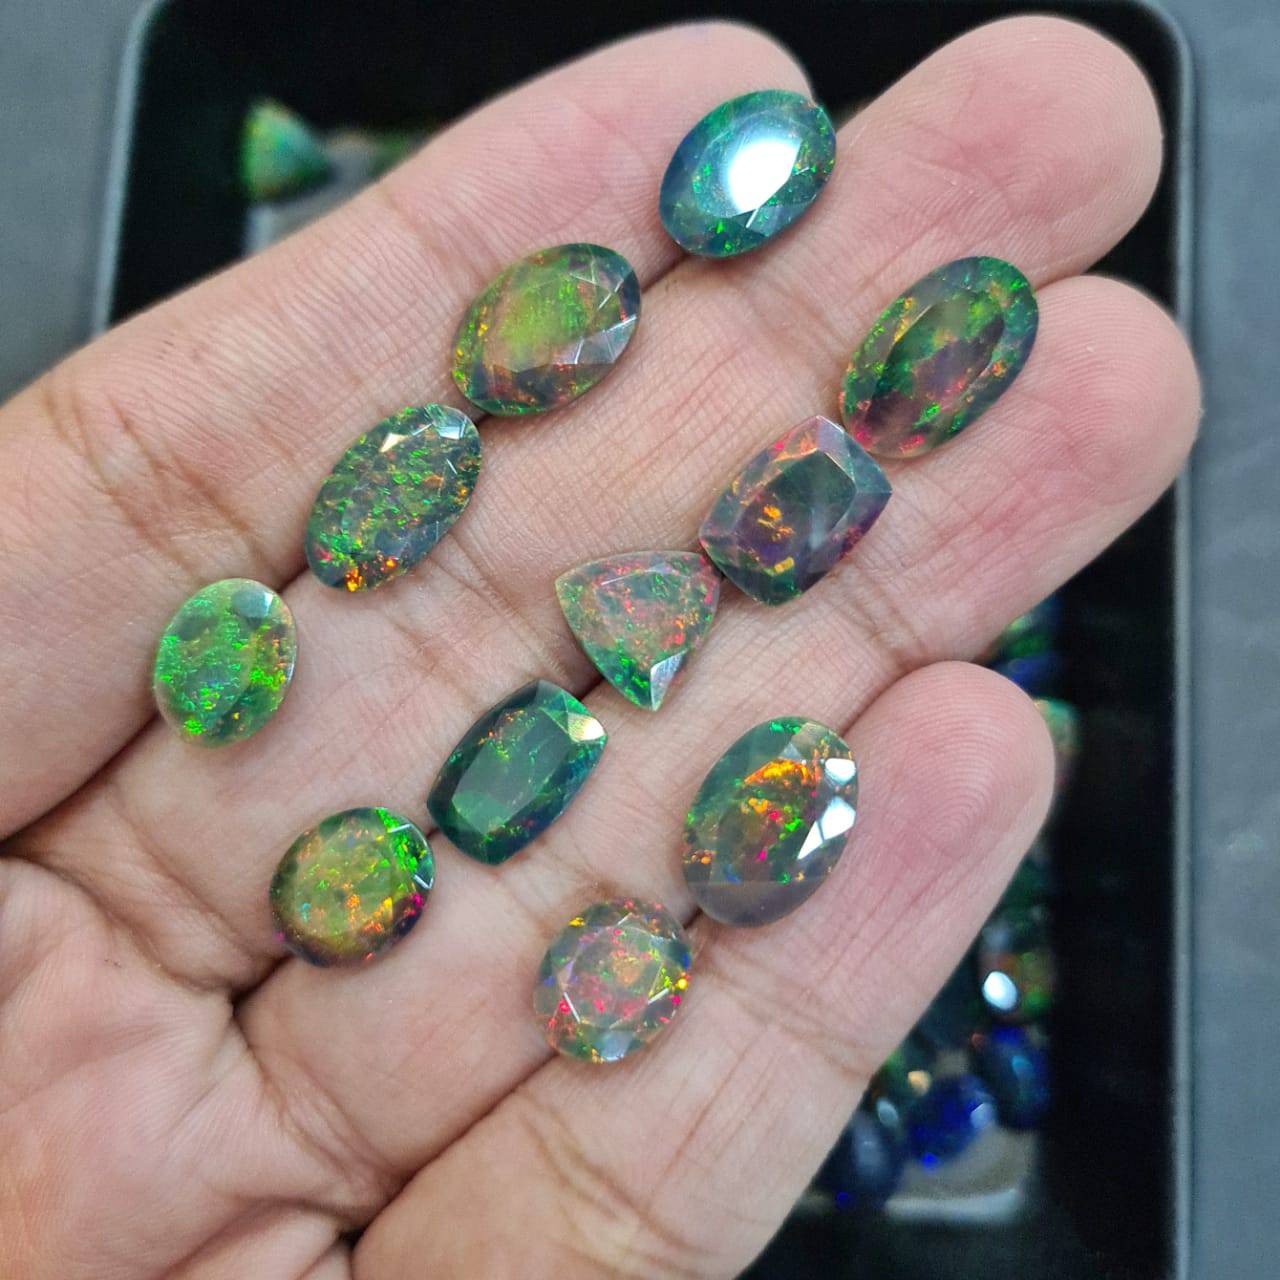 50% OFF|  Faceted Black Opal | Top Quality 11-14mm Sizes - The LabradoriteKing